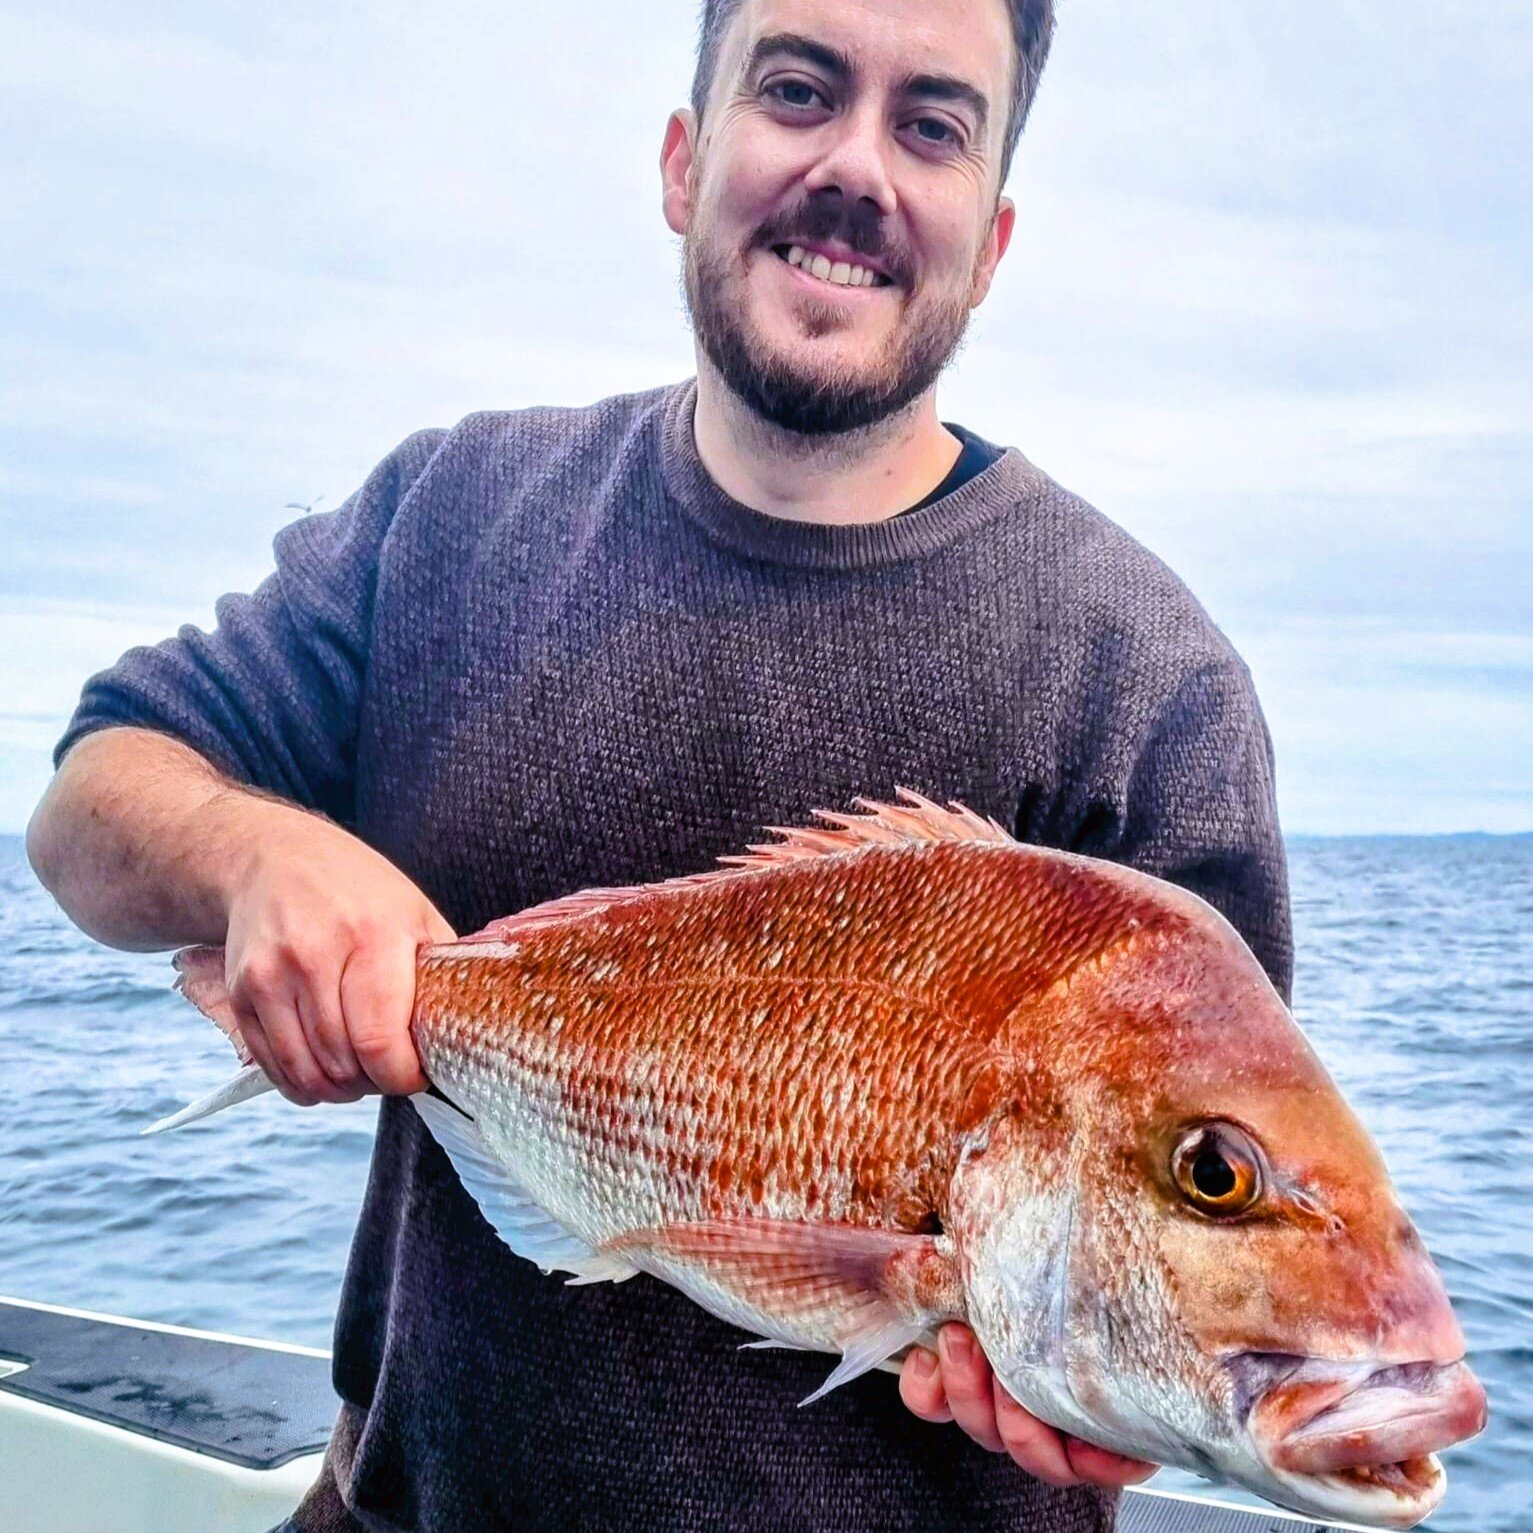 Pannie sized twins for the table. Curried with rice in wraps? Or maybe Mexican fish taco's? Beautiful eating fish whatever your favourite dish

@okuma_nz 

#ultimatechartersnewzealand #ultimatecharters #fishingcharters #lurefishing #pannies #snapper 